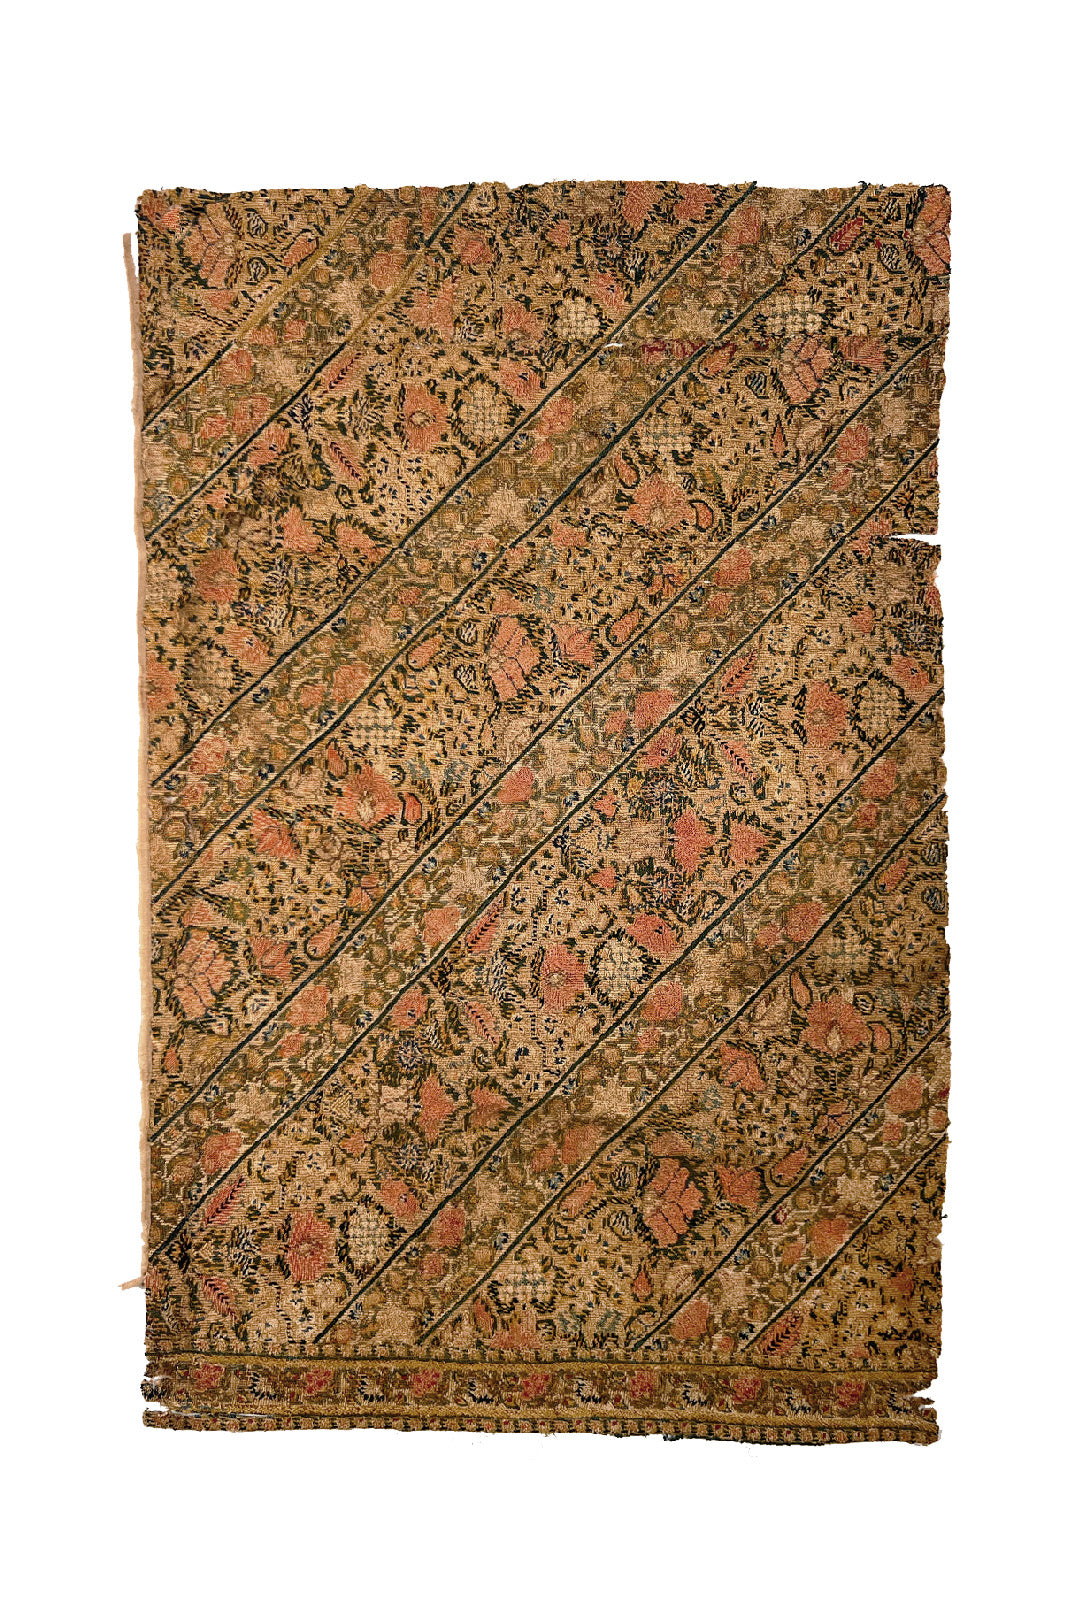 Embroidered Trouser Cuff Fragment (Nakshe)